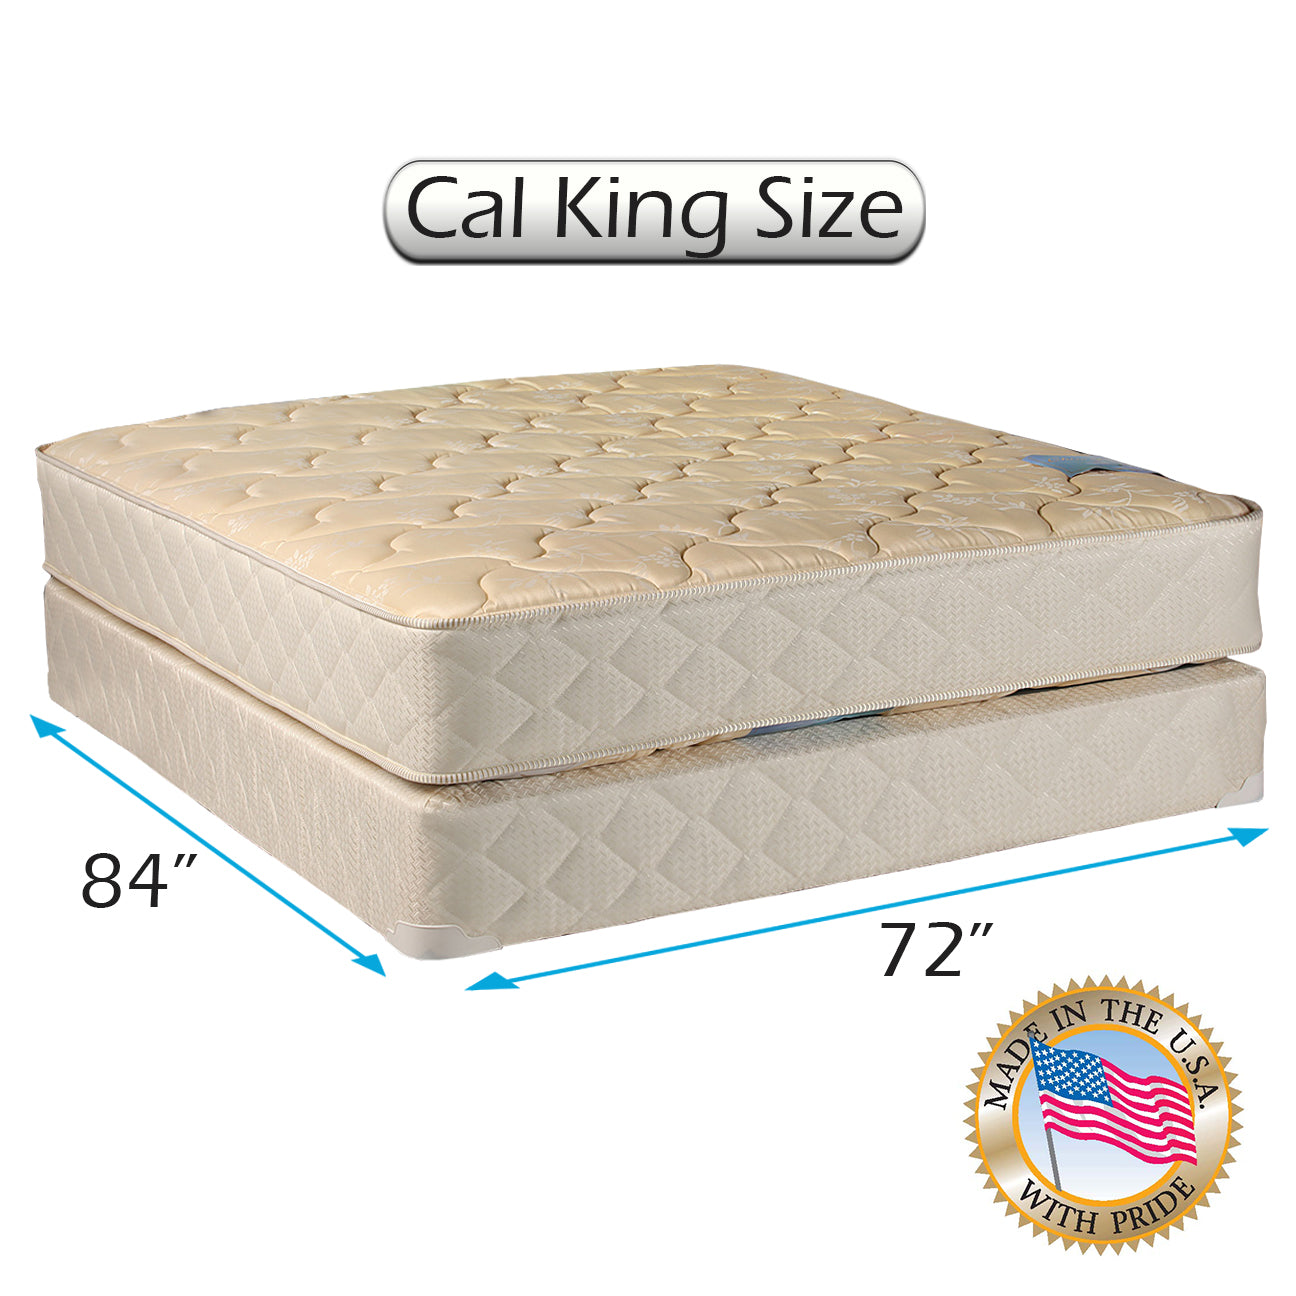 Chiro Premier Orthopedic (Beige) California King Size Mattress and Box Spring Set - Fully Assembled, Good for Your Back, Long Lasting and 2 Sided